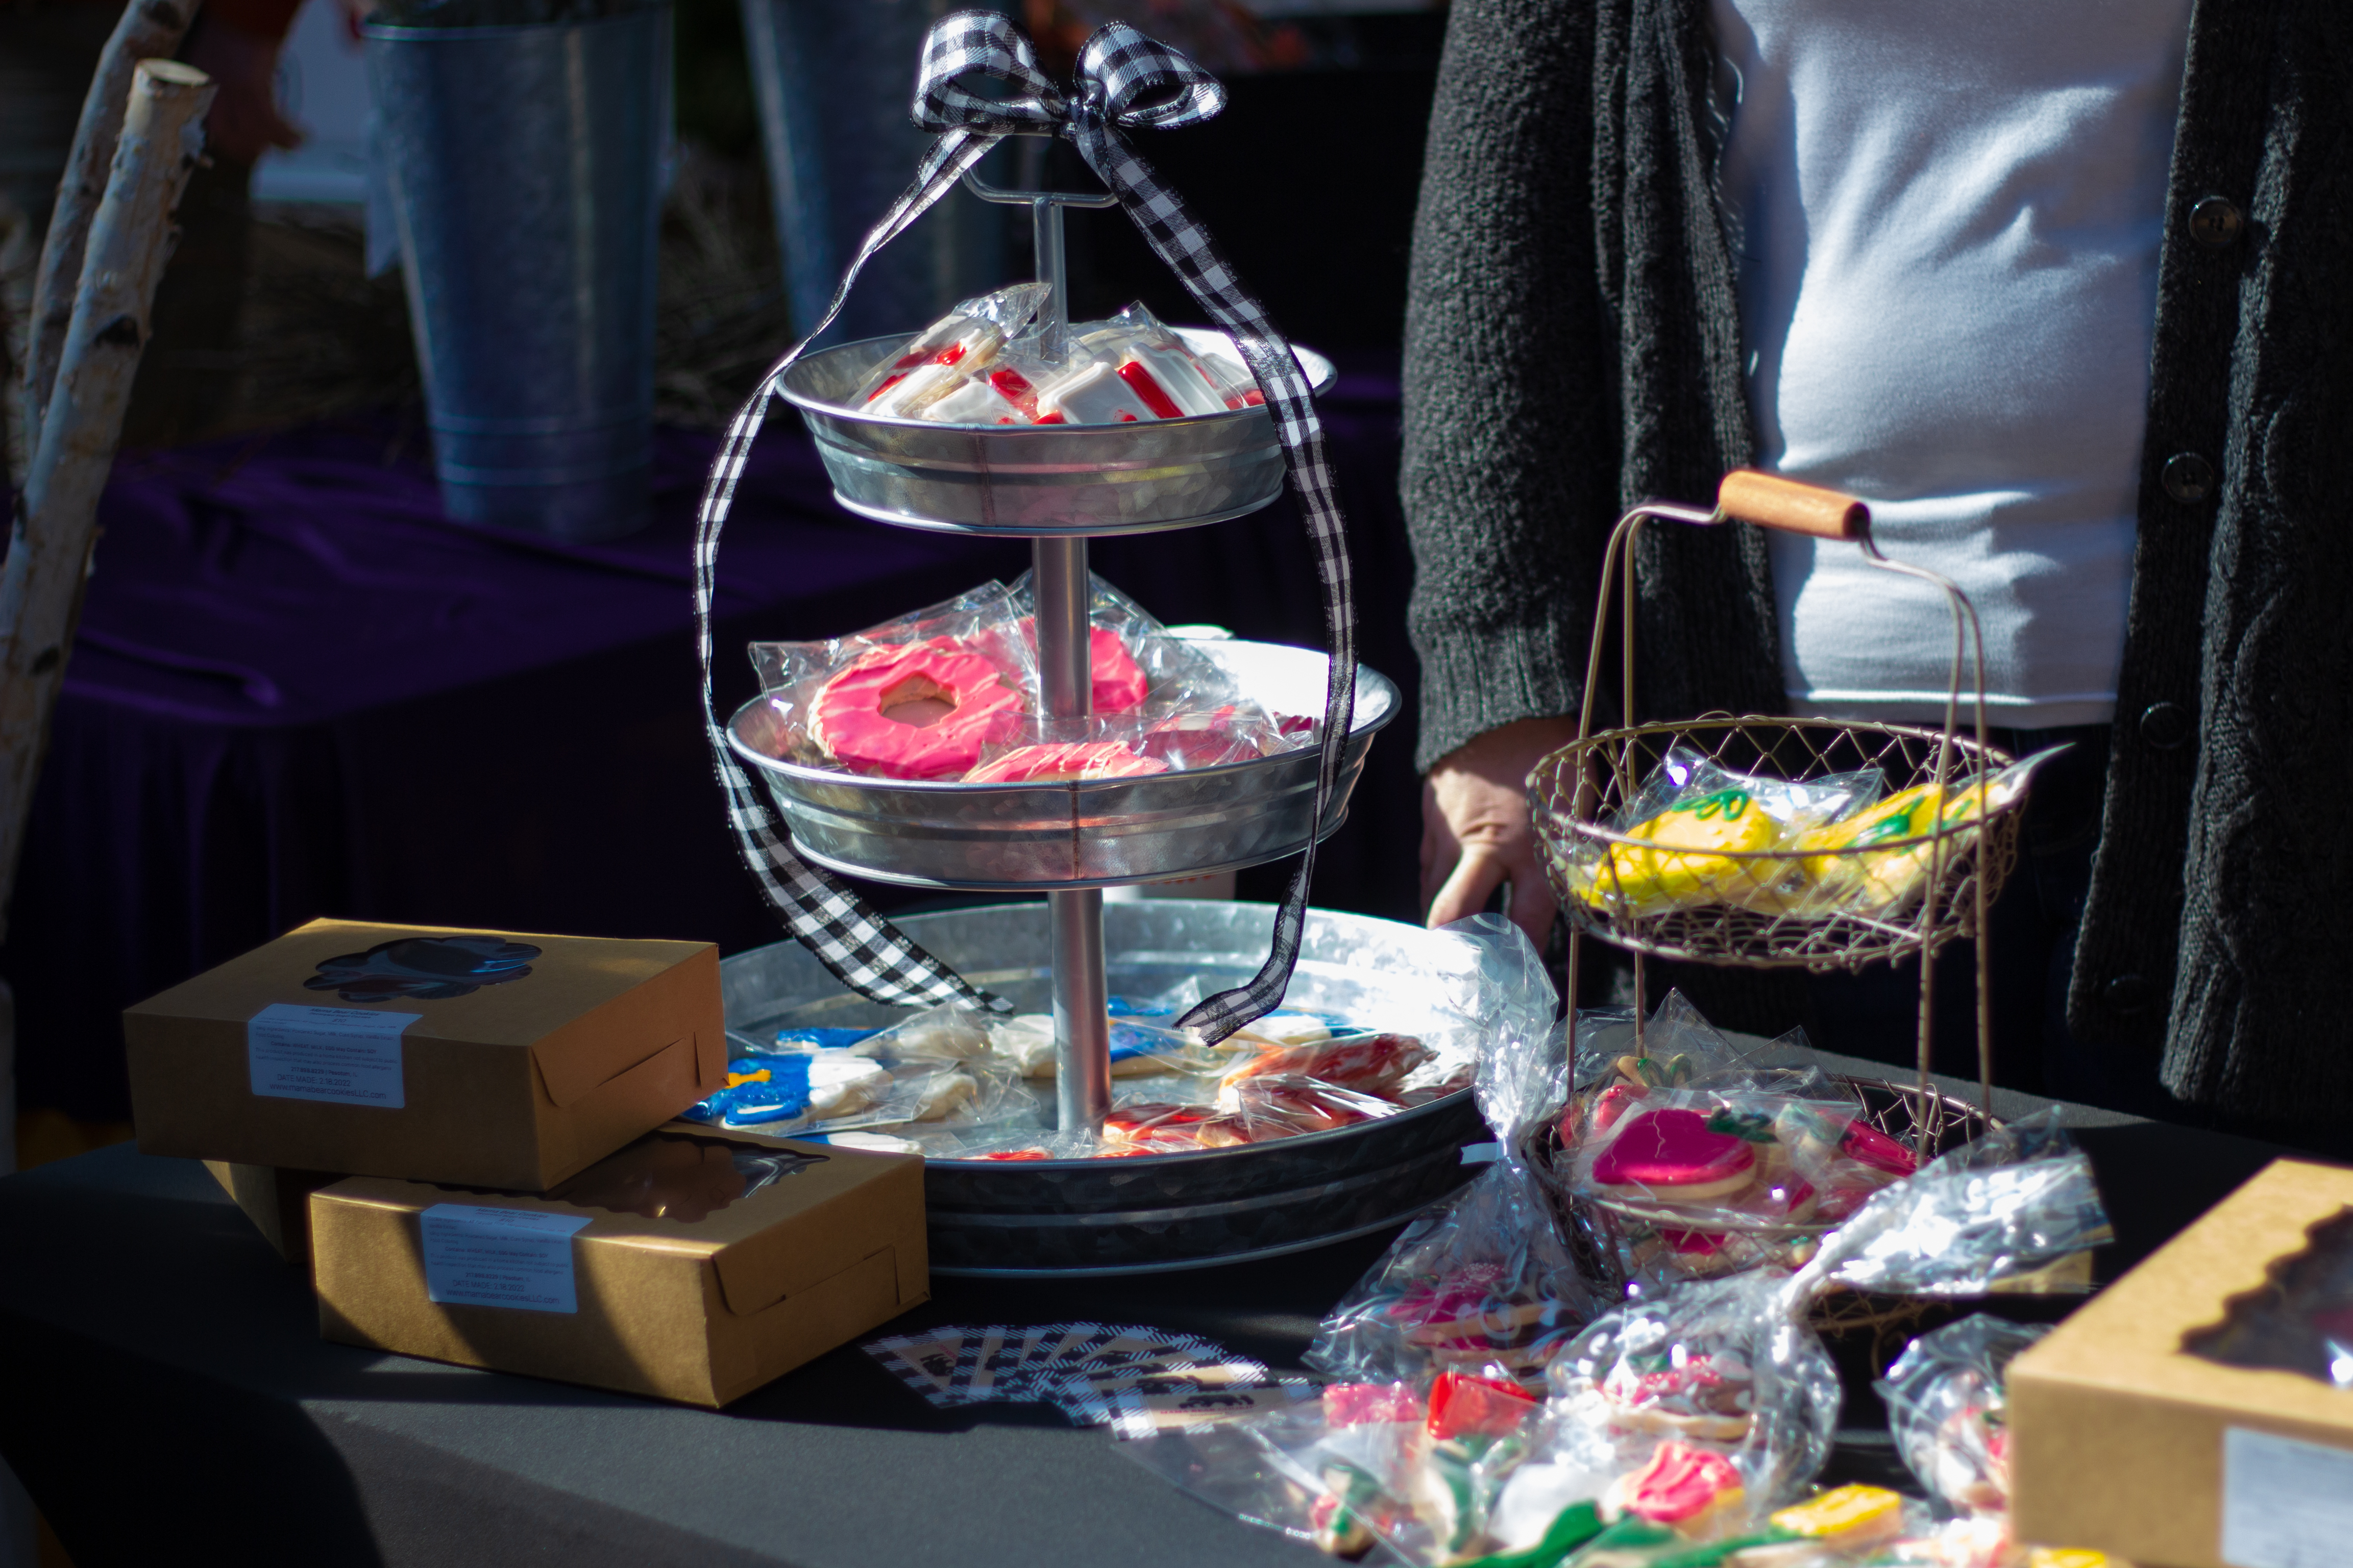 At Urbana's indoor Winter Farmers' Market, a vendor stands behind her desserts for sale. There is a metal tiered display of cookies on a black tableclothed table. Photo by Jorge Murga.